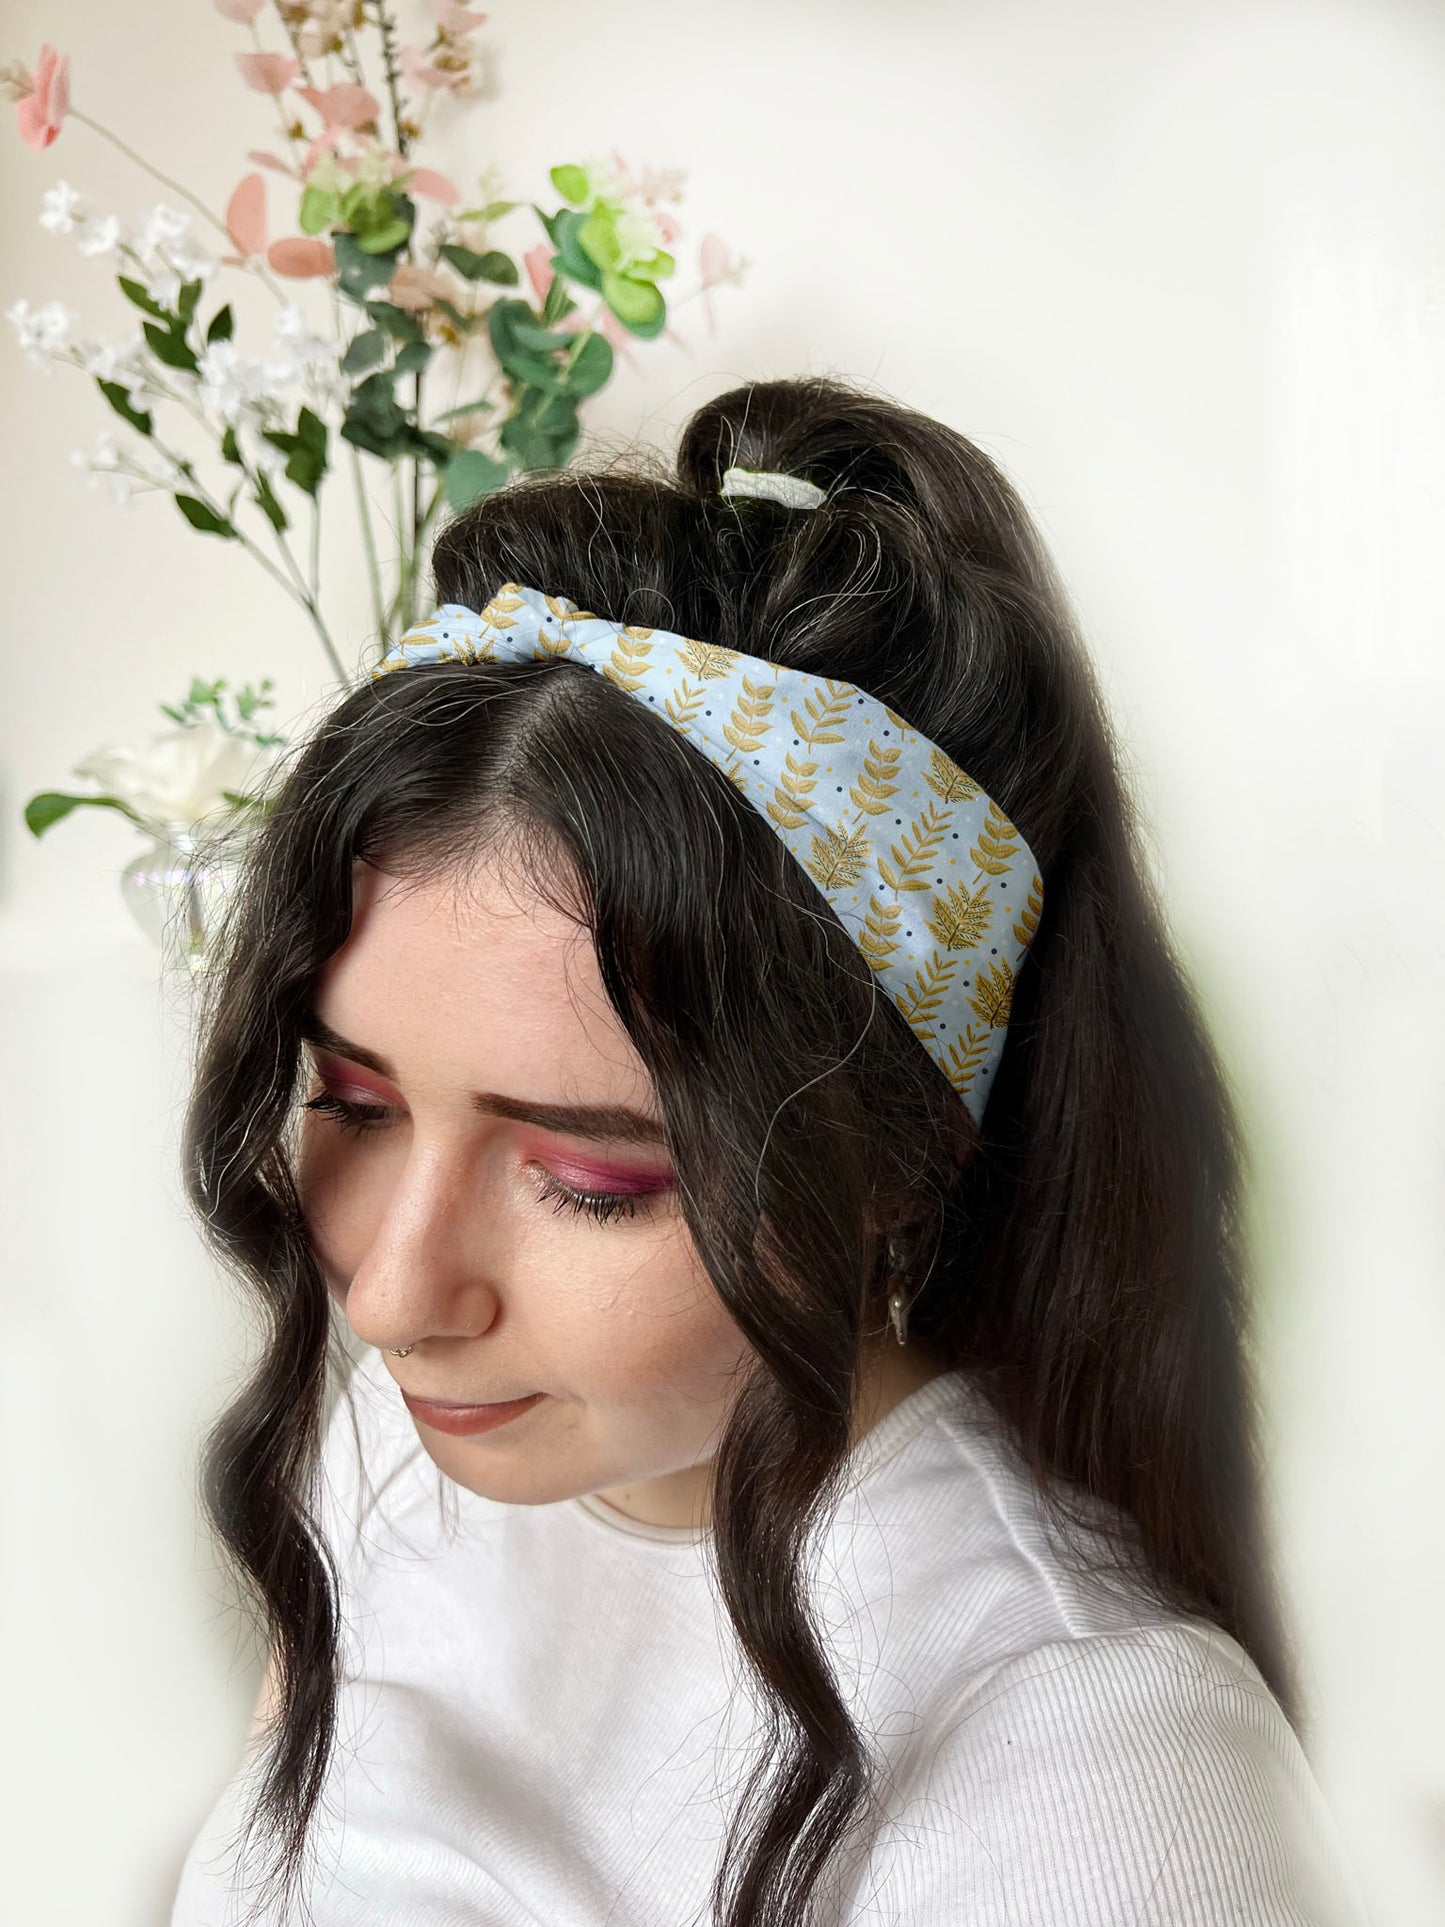 dark haired girl wears yellow foliage patterned headband in hair, an ideal gift for fiance